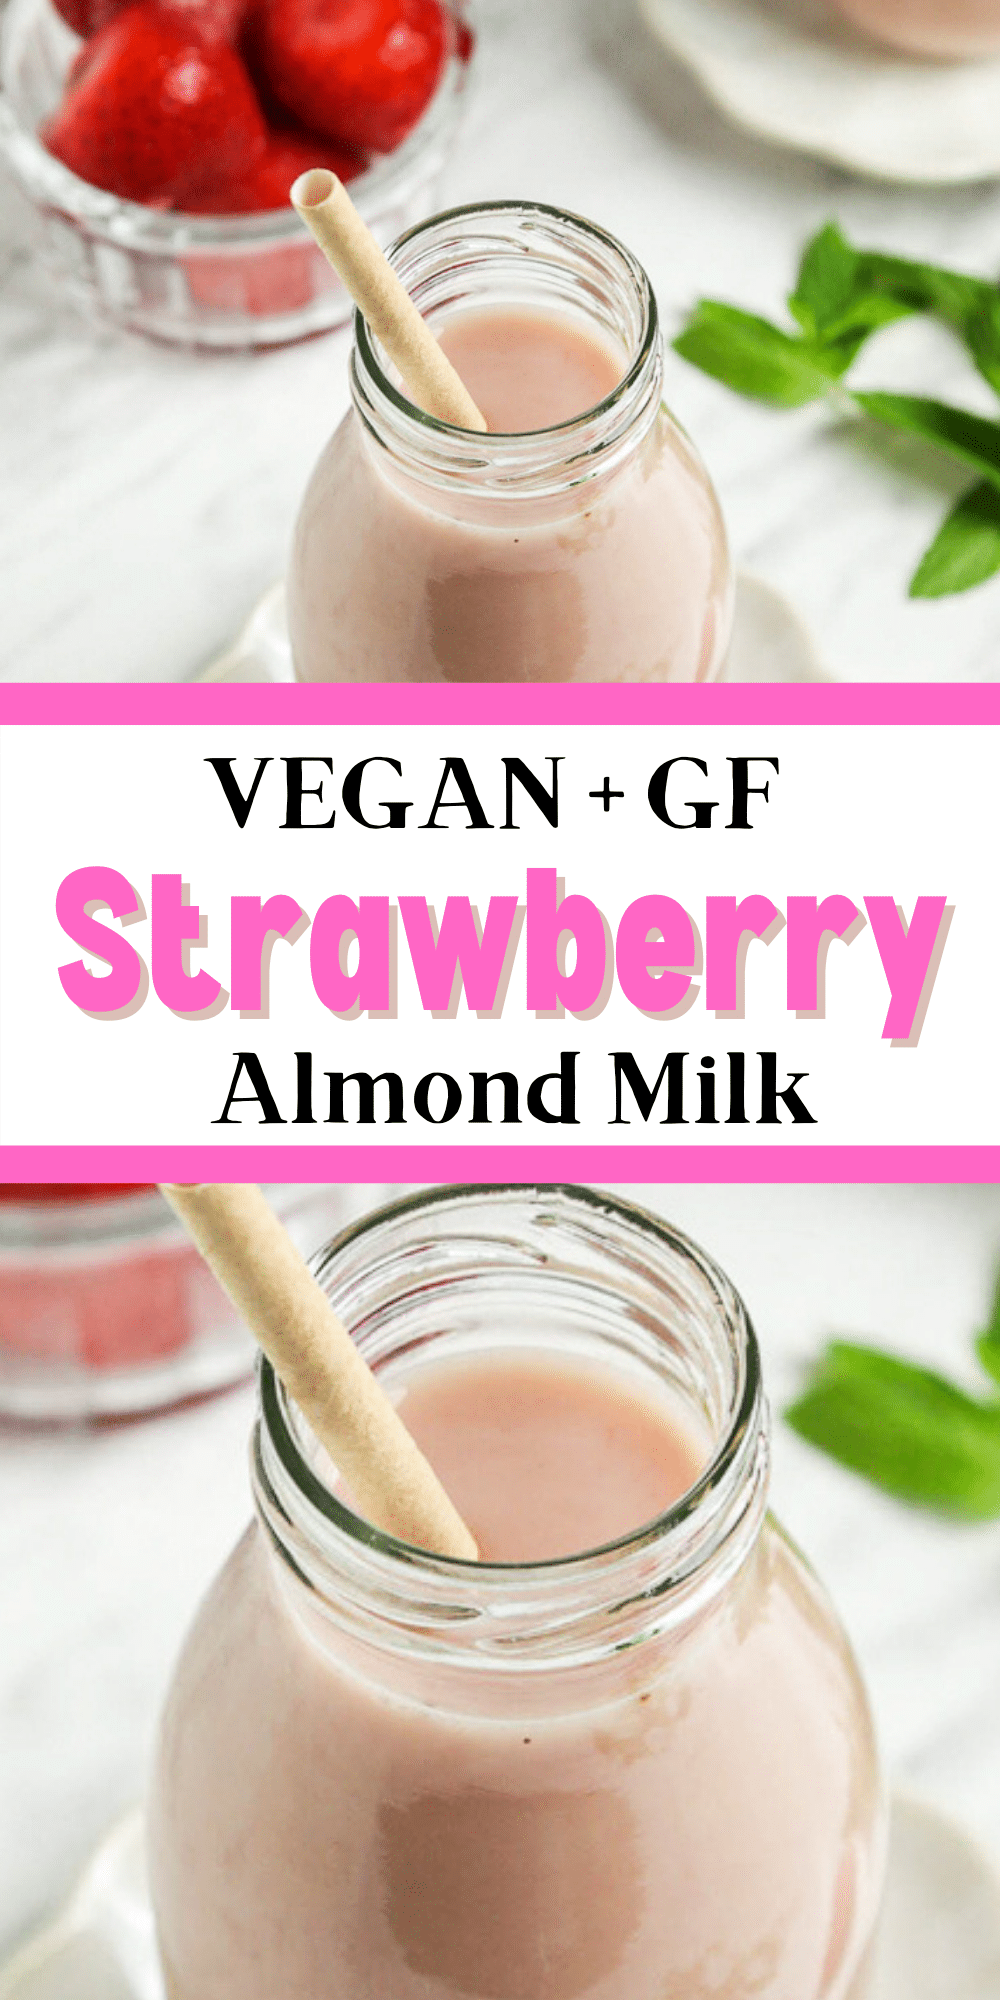 Strawberry Almond Milk is so creamy and easy with just 4 ingredients! Make this all-natural vegan strawberry milk in just 10 minutes that kids and adults alike love. #veganstrawberrymilk #drinks #mealprep